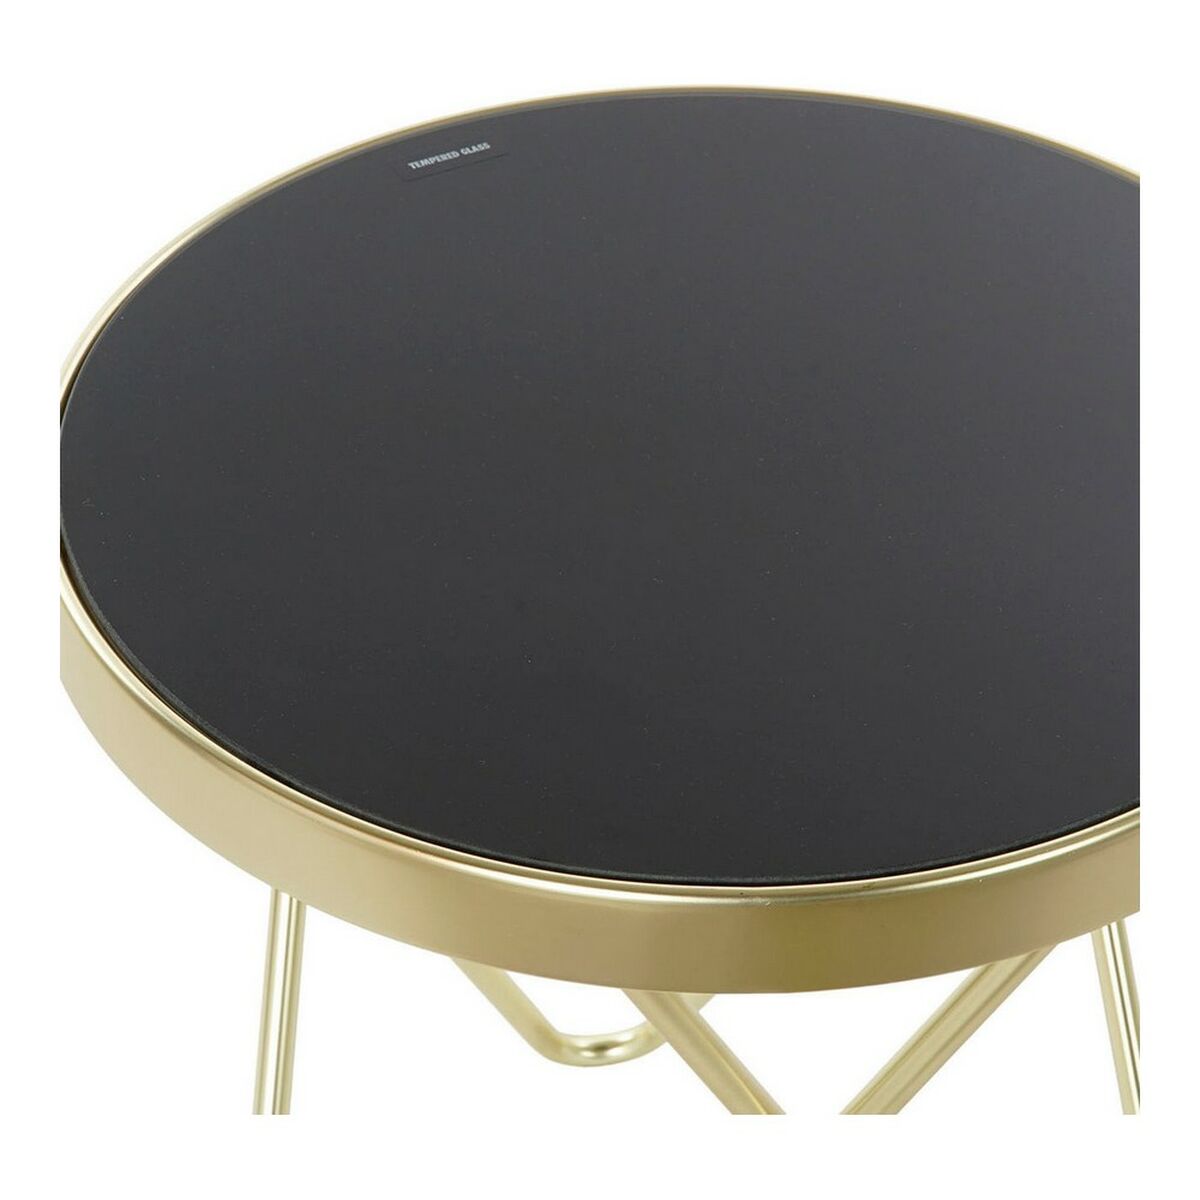 Round Side table with Tempered Glass and Golden Metal Legs (42 x 42 x 46 cm)